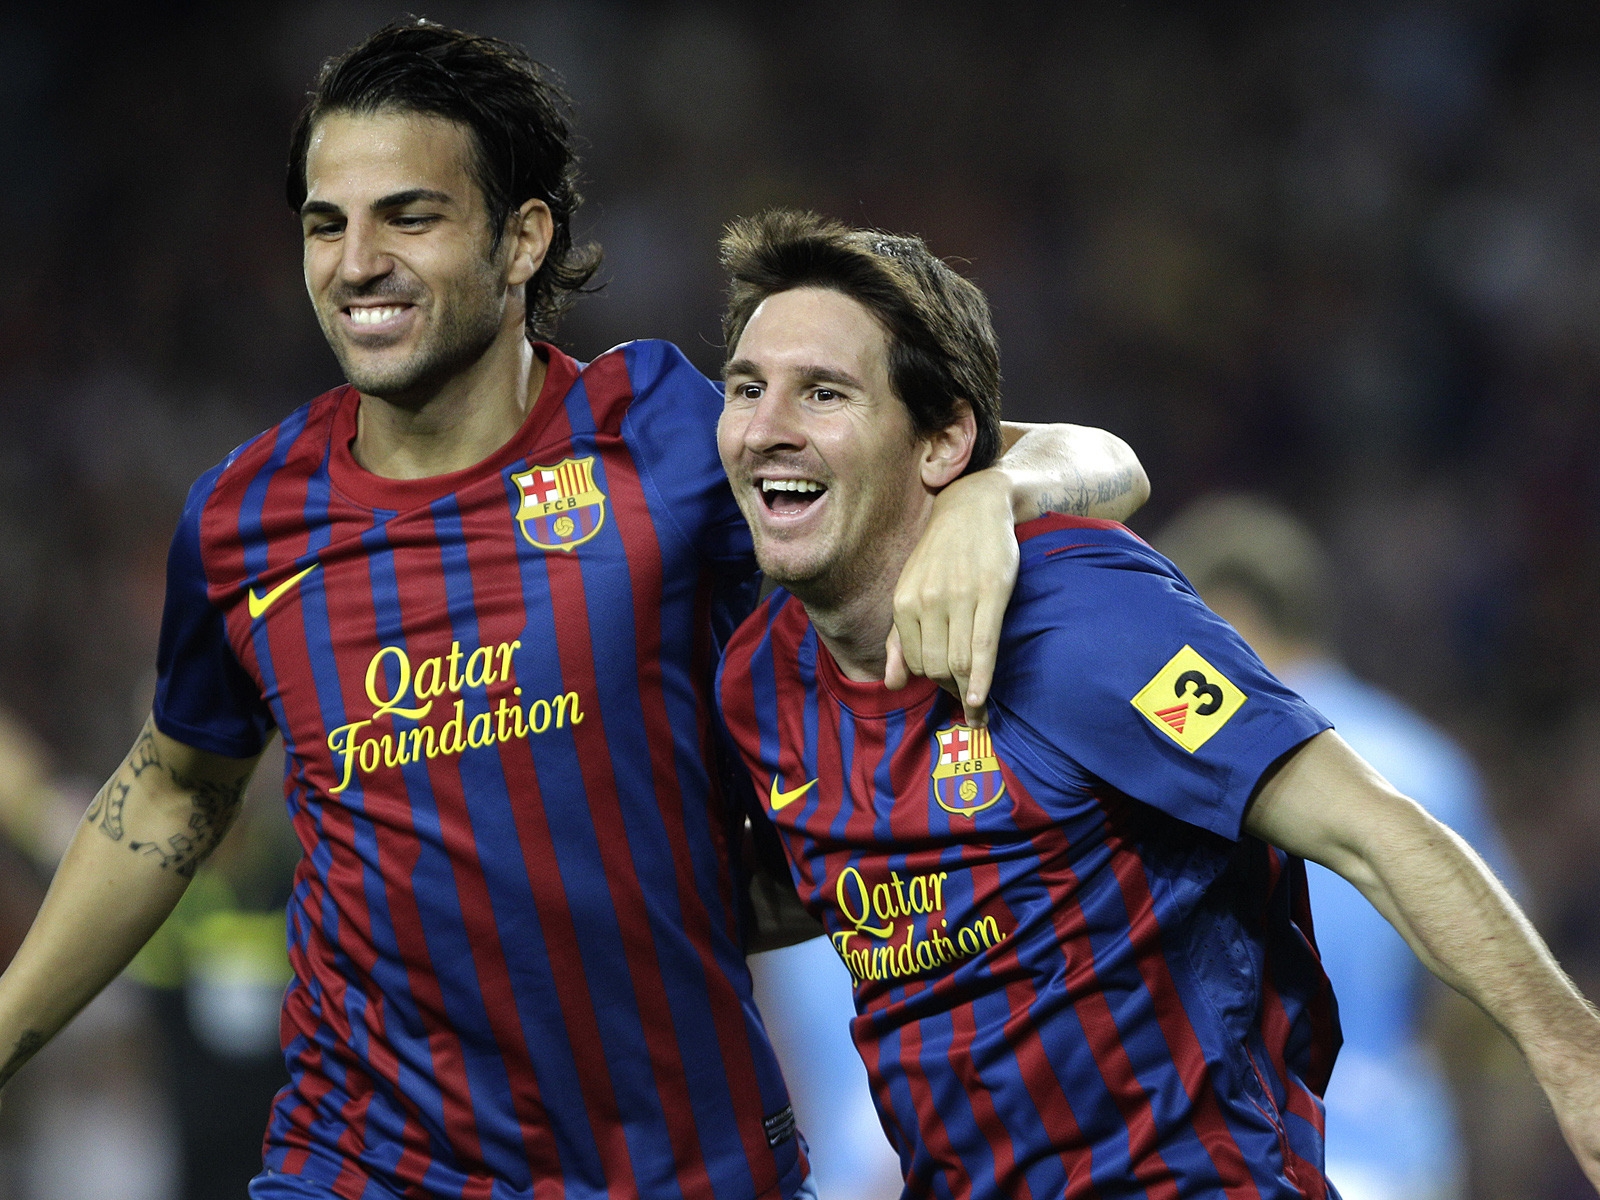 Cesc Fabregas and Lionel Messi for 1600 x 1200 resolution